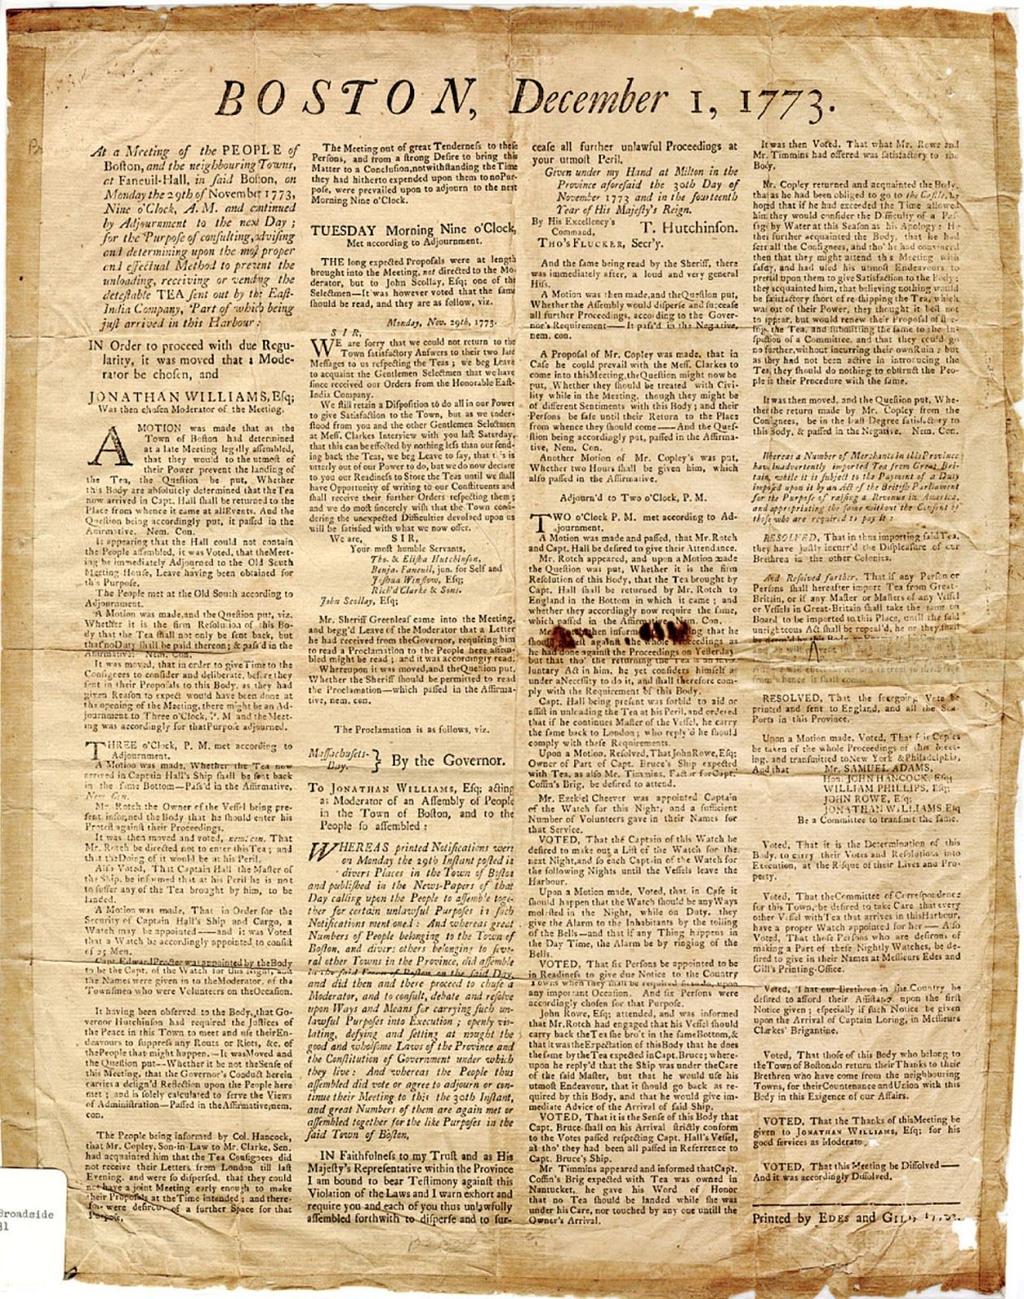 Appendix C Boston, December 1, 1773. At a meeting of the people of Boston and the neighboring towns at Faneuil-Hall, Digital Public Library of America, http://dp.